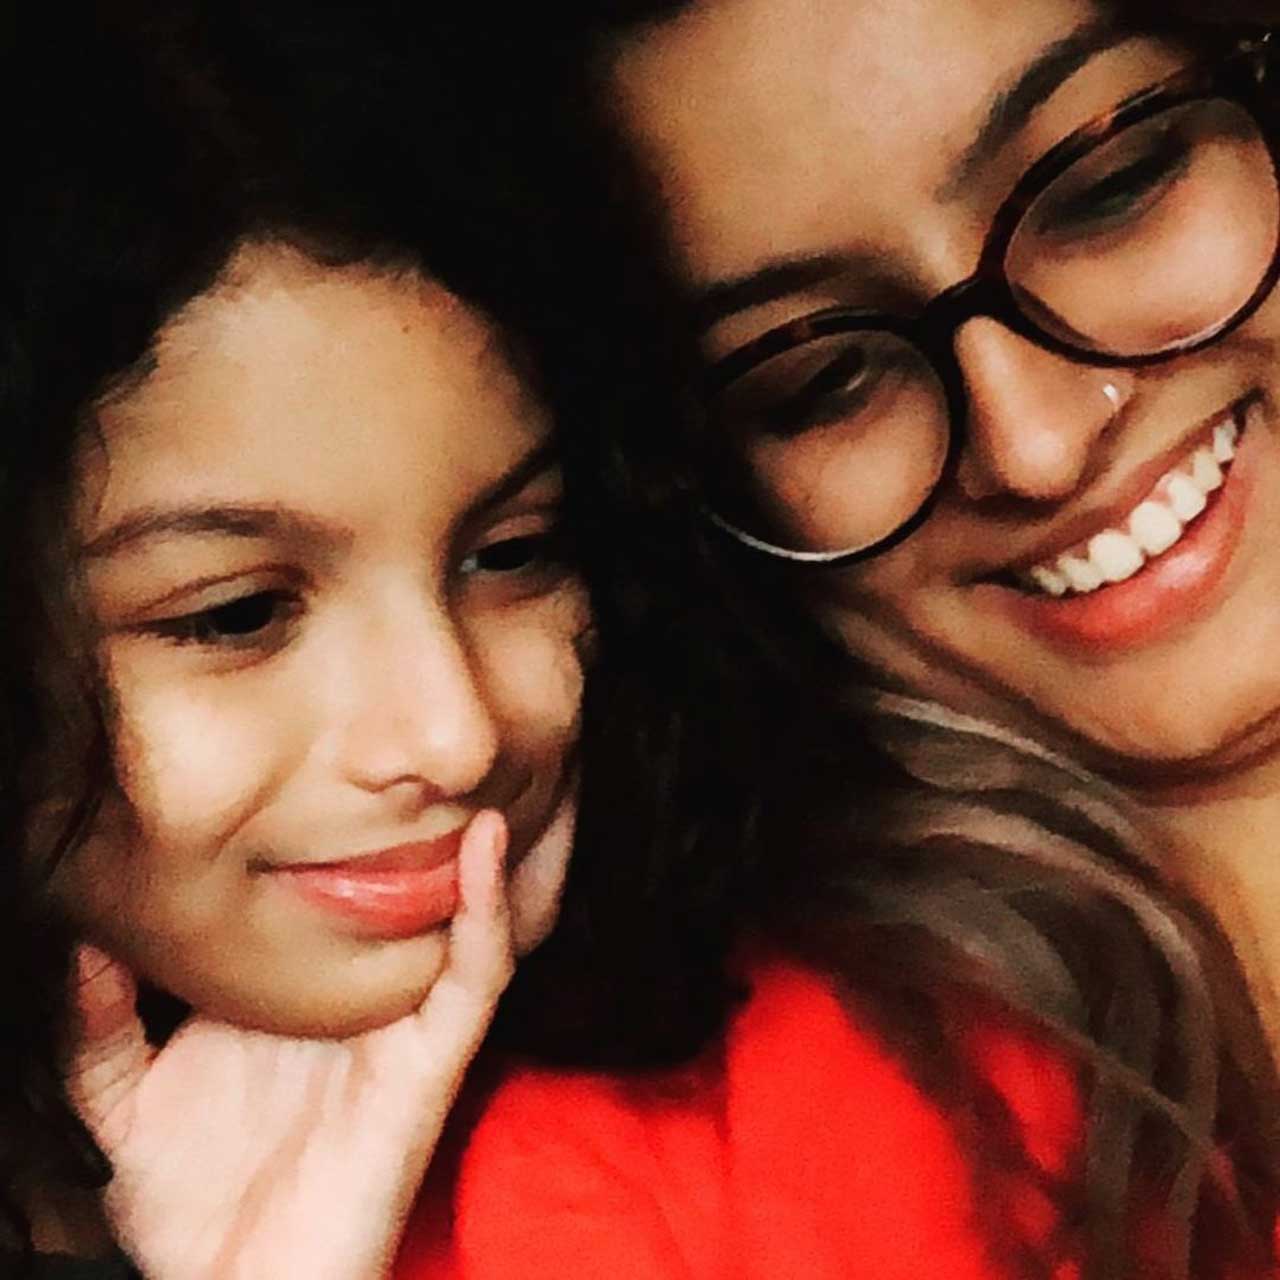 Farhan Akhtar shared a beautiful picture of his daughters Shakya and Akira Akhtar on his Instagram handle. Along with the photo, he wrote, 